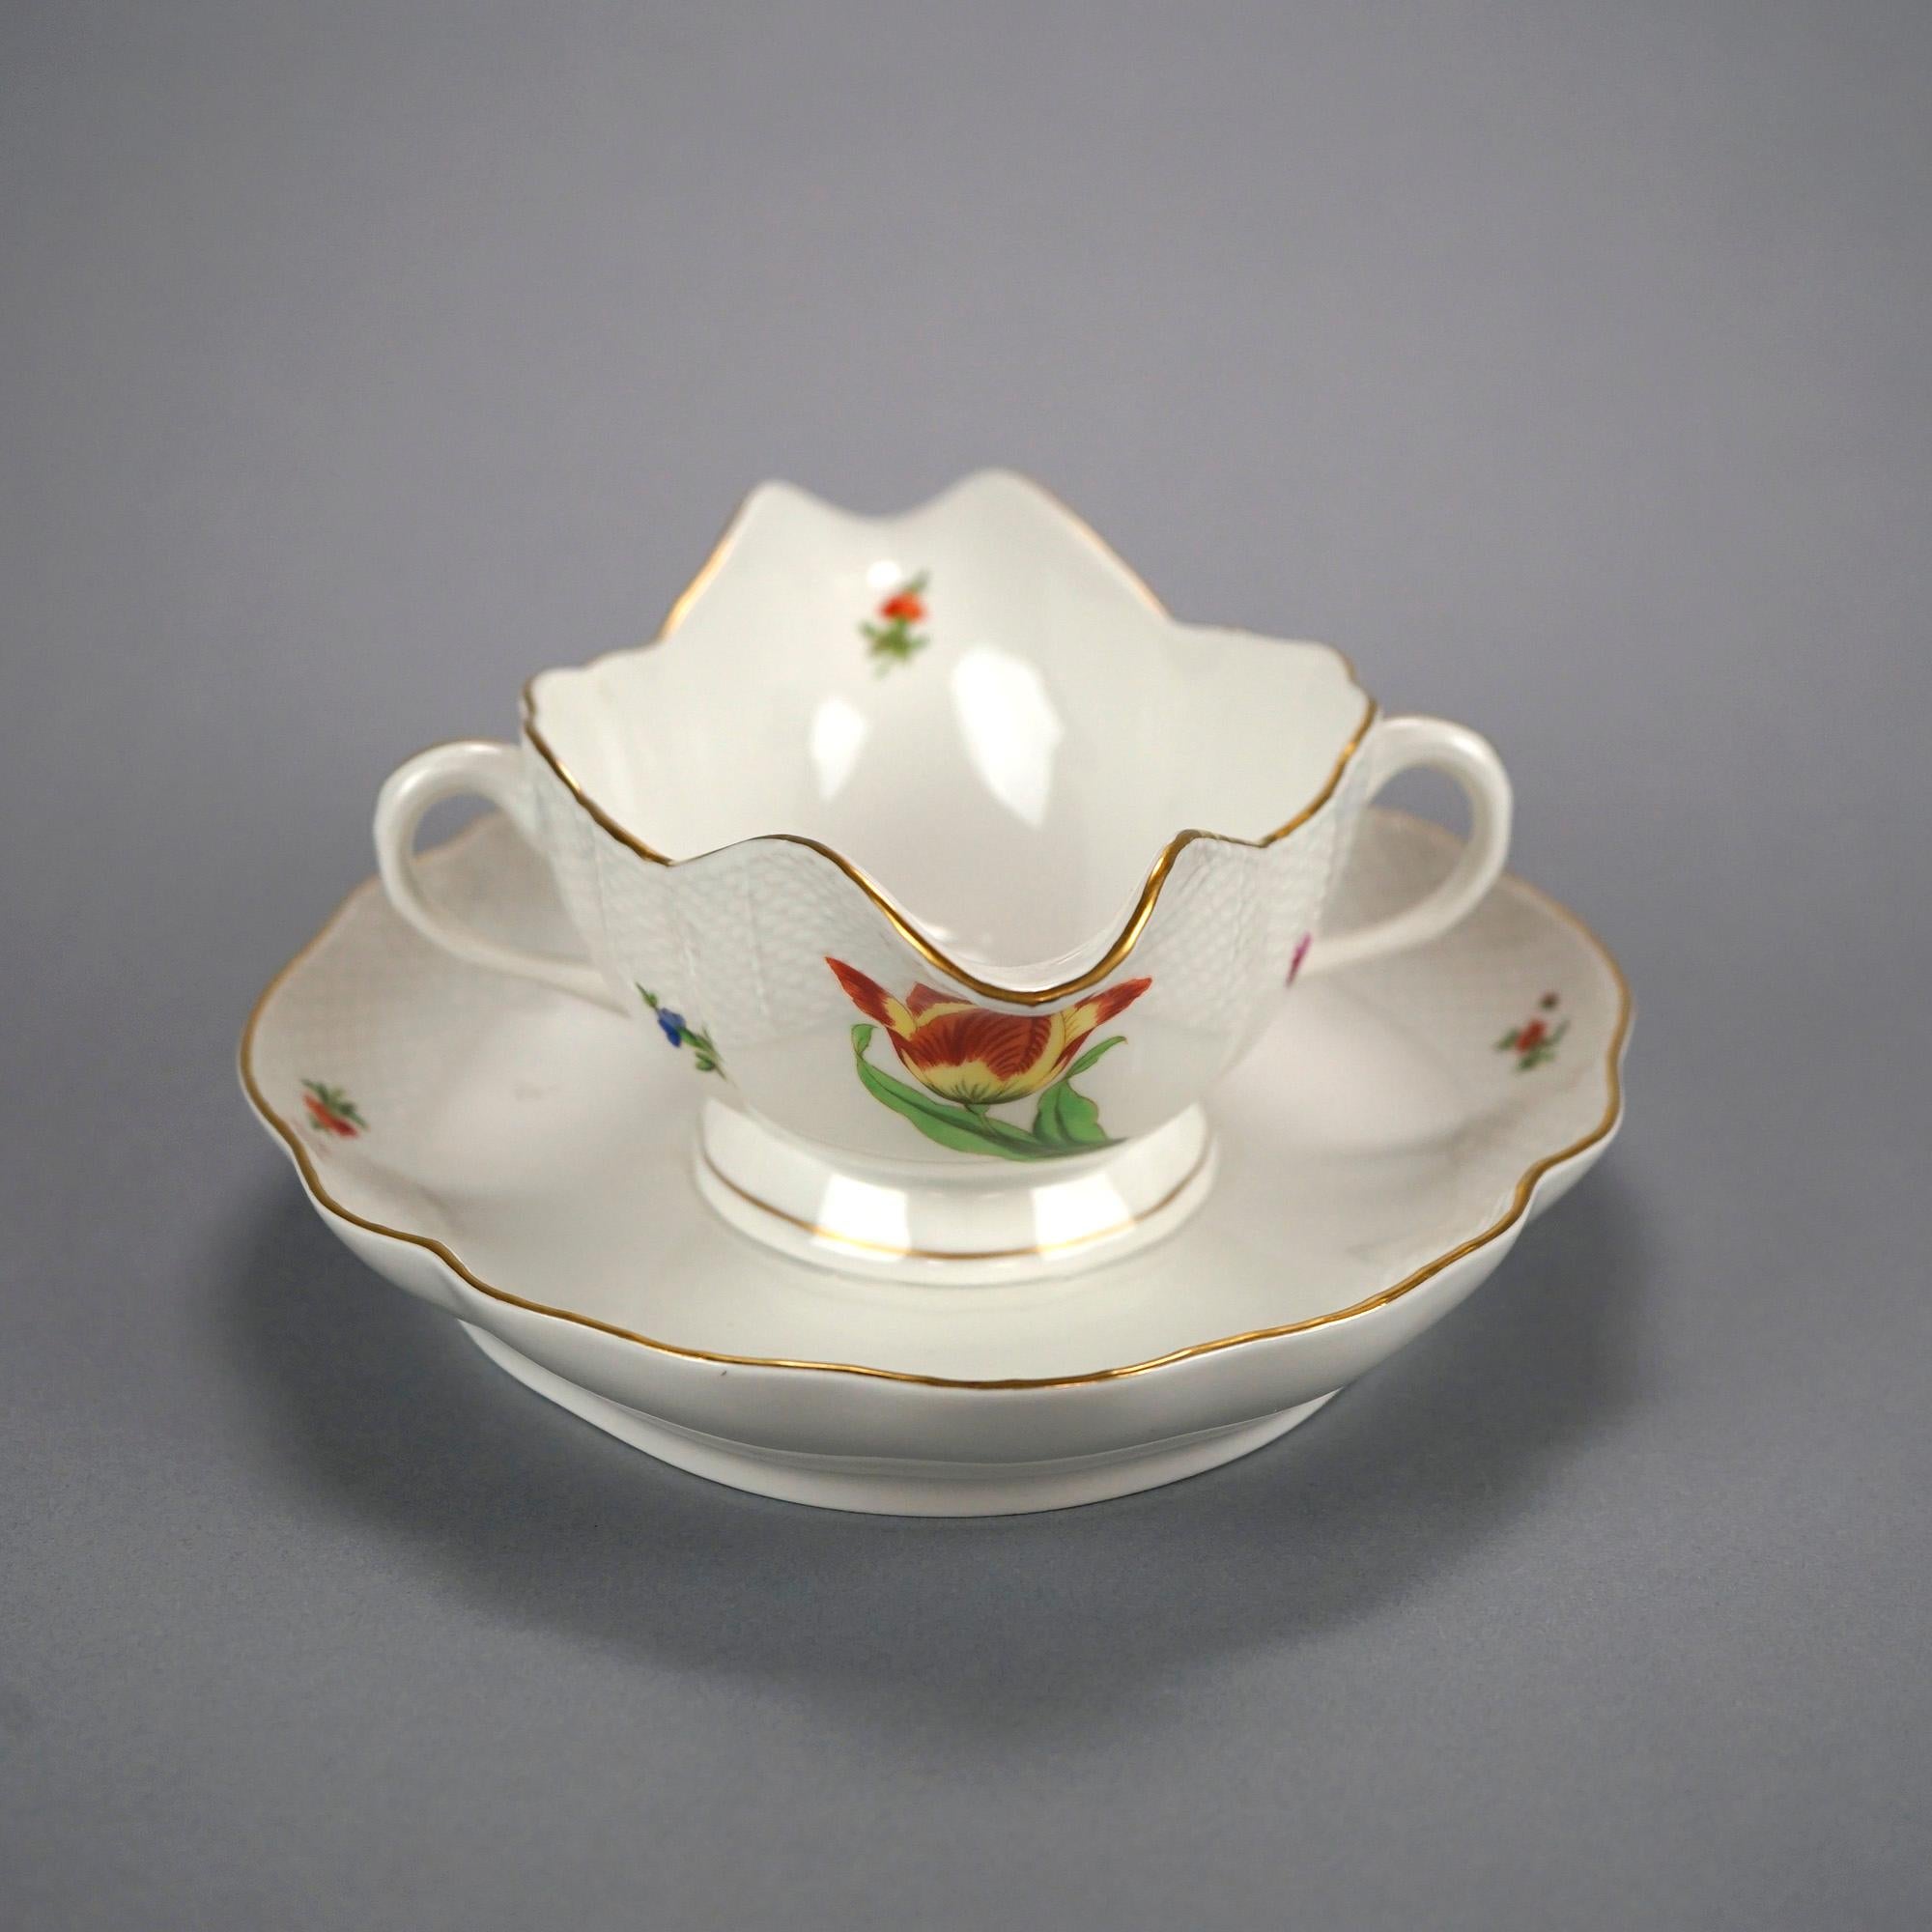 Herend Porcelain Double Handled Gravy Sauce Boat with Painted Flowers, 20th C For Sale 2